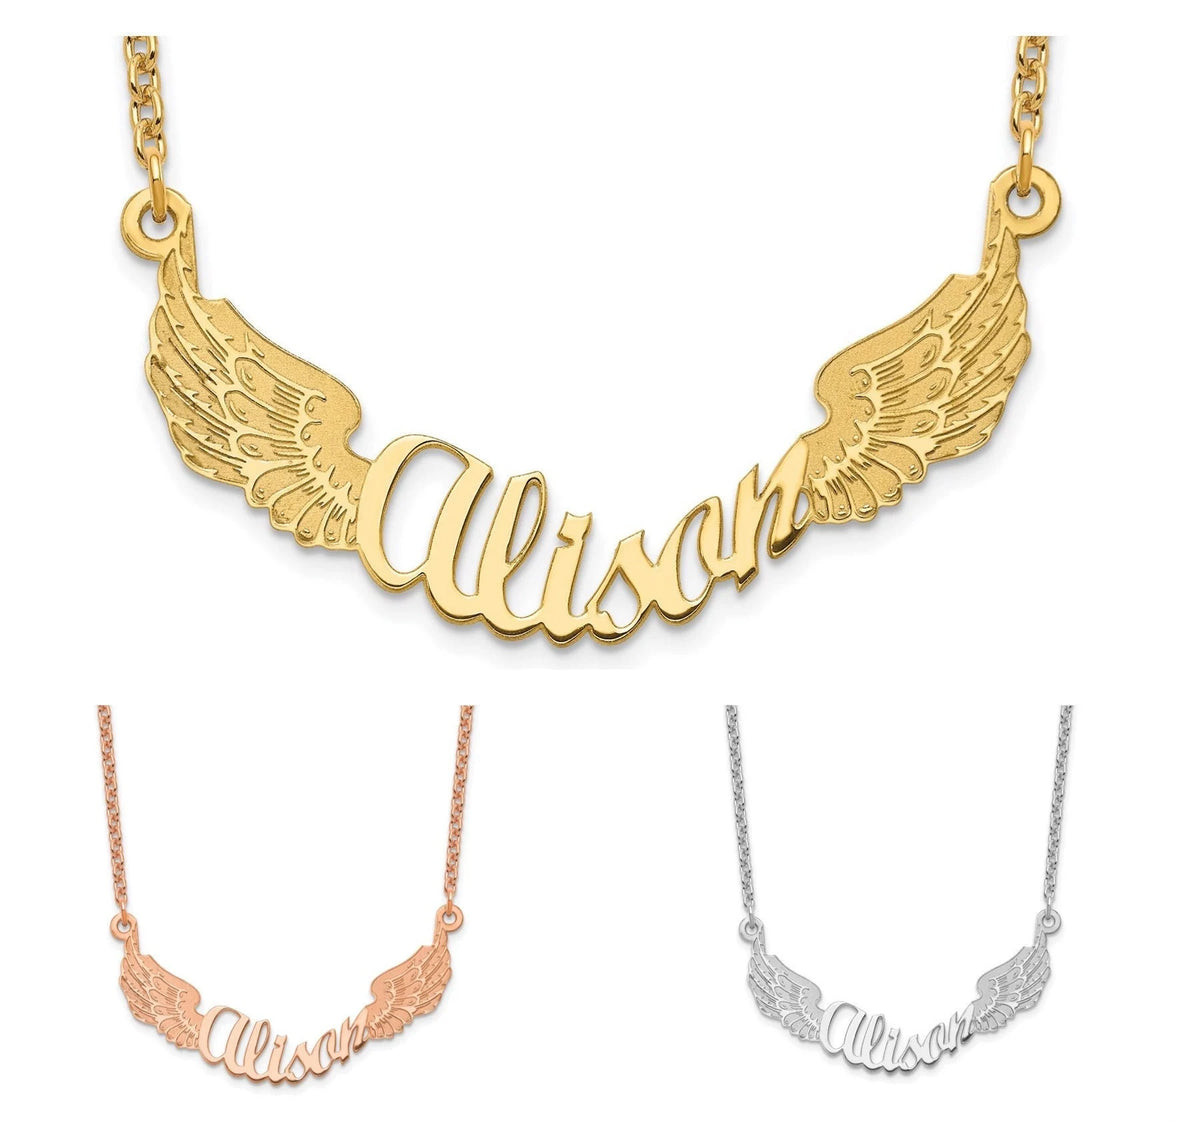 Personalized Angel Wing Name Necklace in Sterling Silver, 10k, or 14k Gold Chain  (1.55 inches wide) Gift Box Included